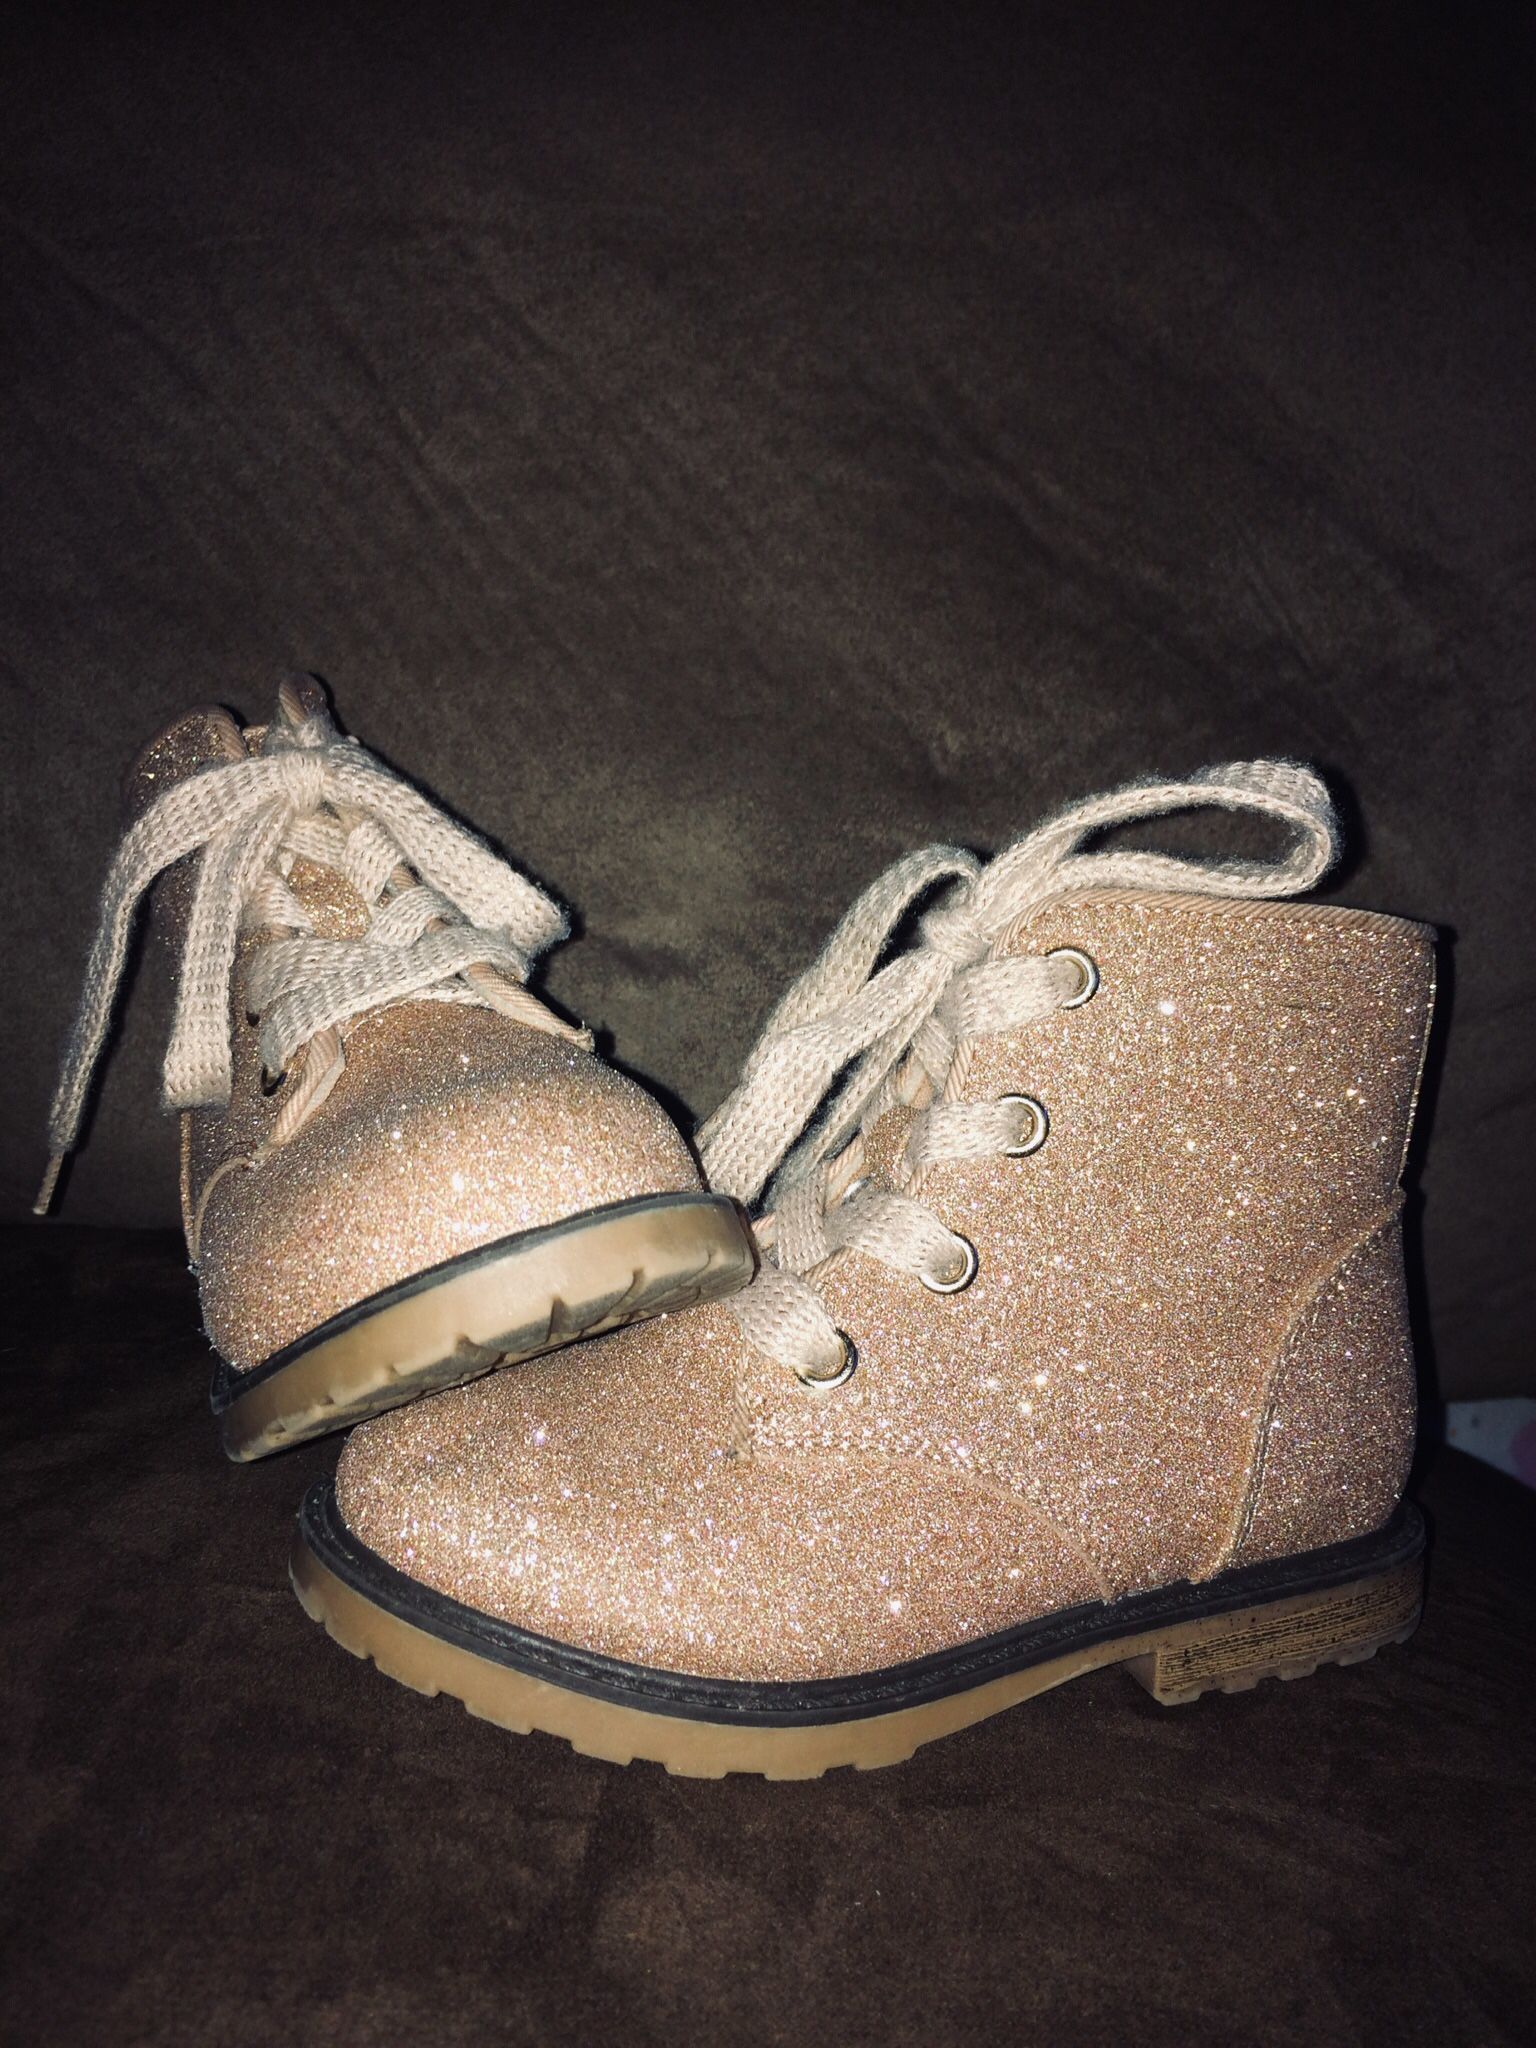 Toddler Girls Pink With Glitter Boots (size 9)